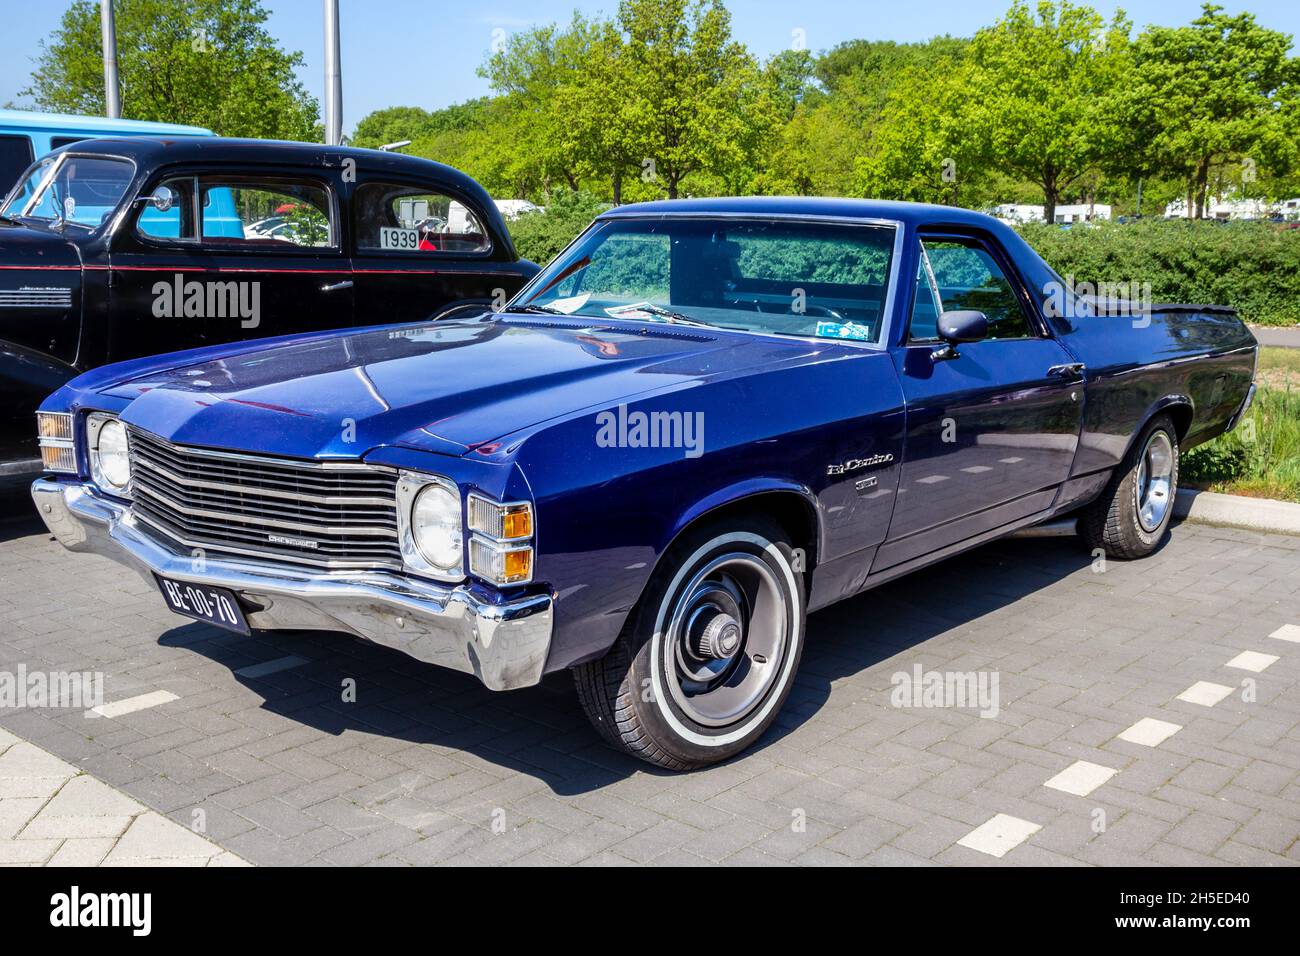 1970 Chevrolet El Camino SS classic car on the parking lot in Rosmalen, The Netherlands - May 8, 2016 Stock Photo